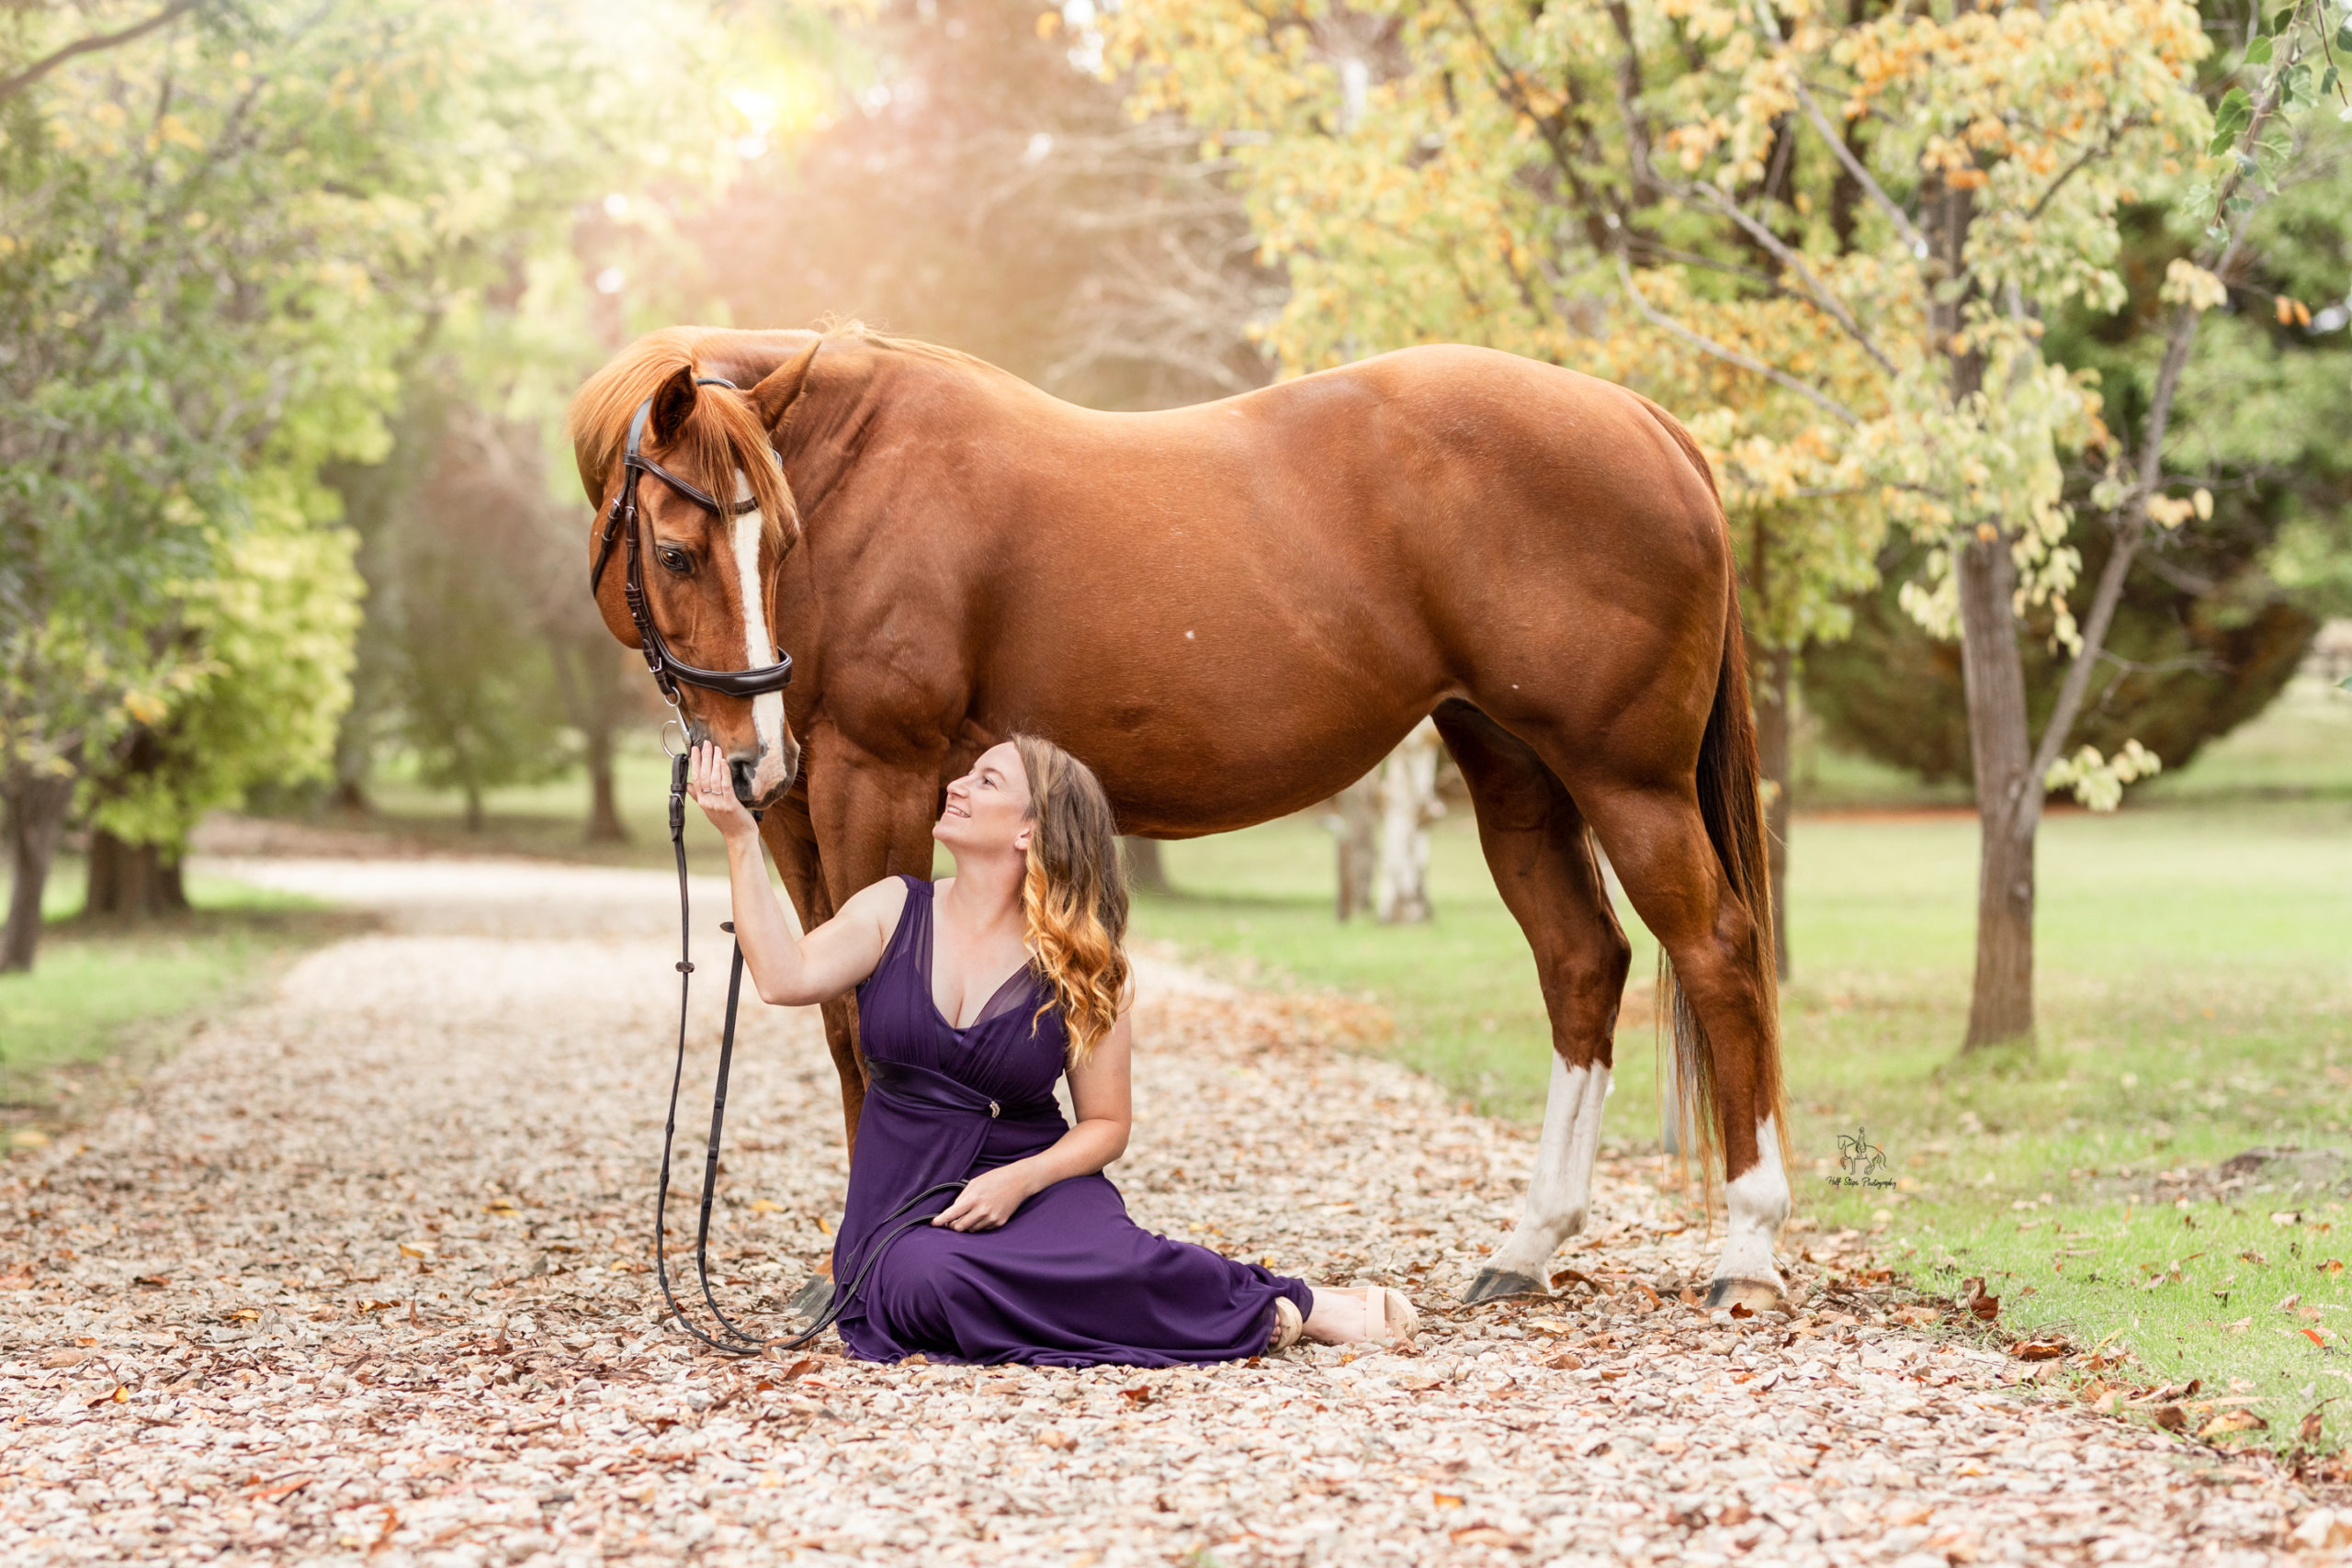 Girl touches horse in photoshoot